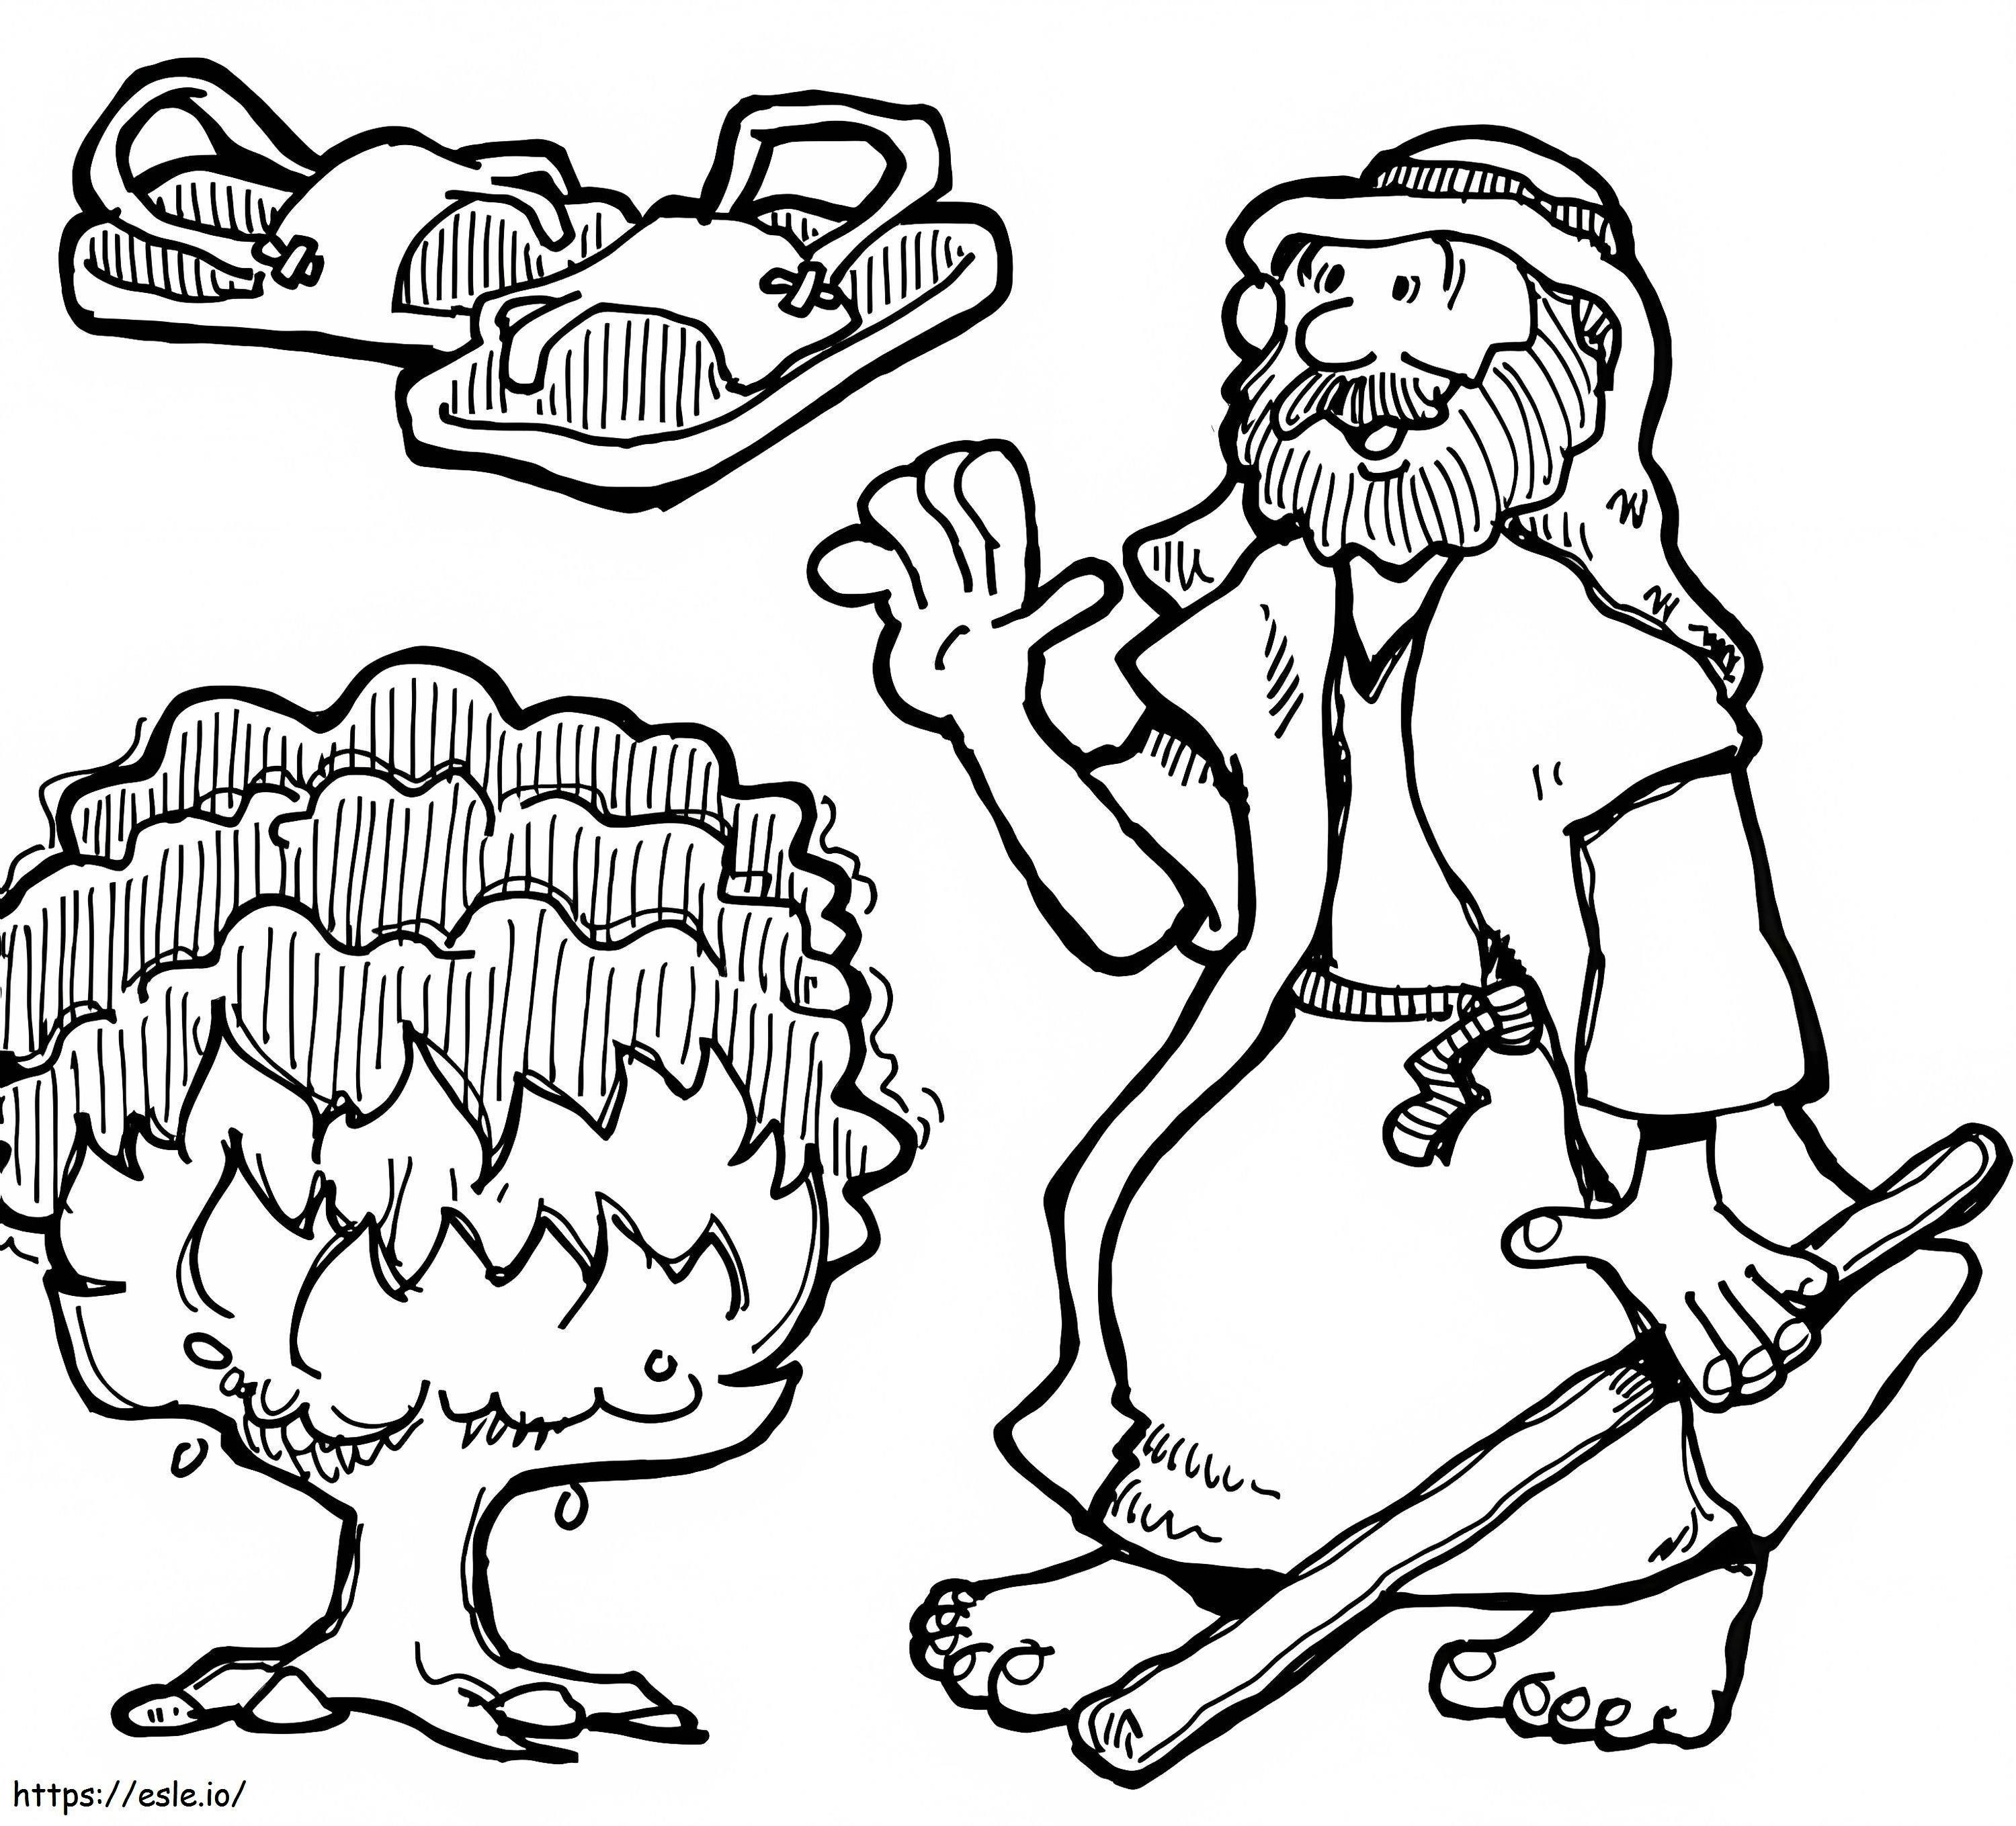 The Burning Bush 1 coloring page